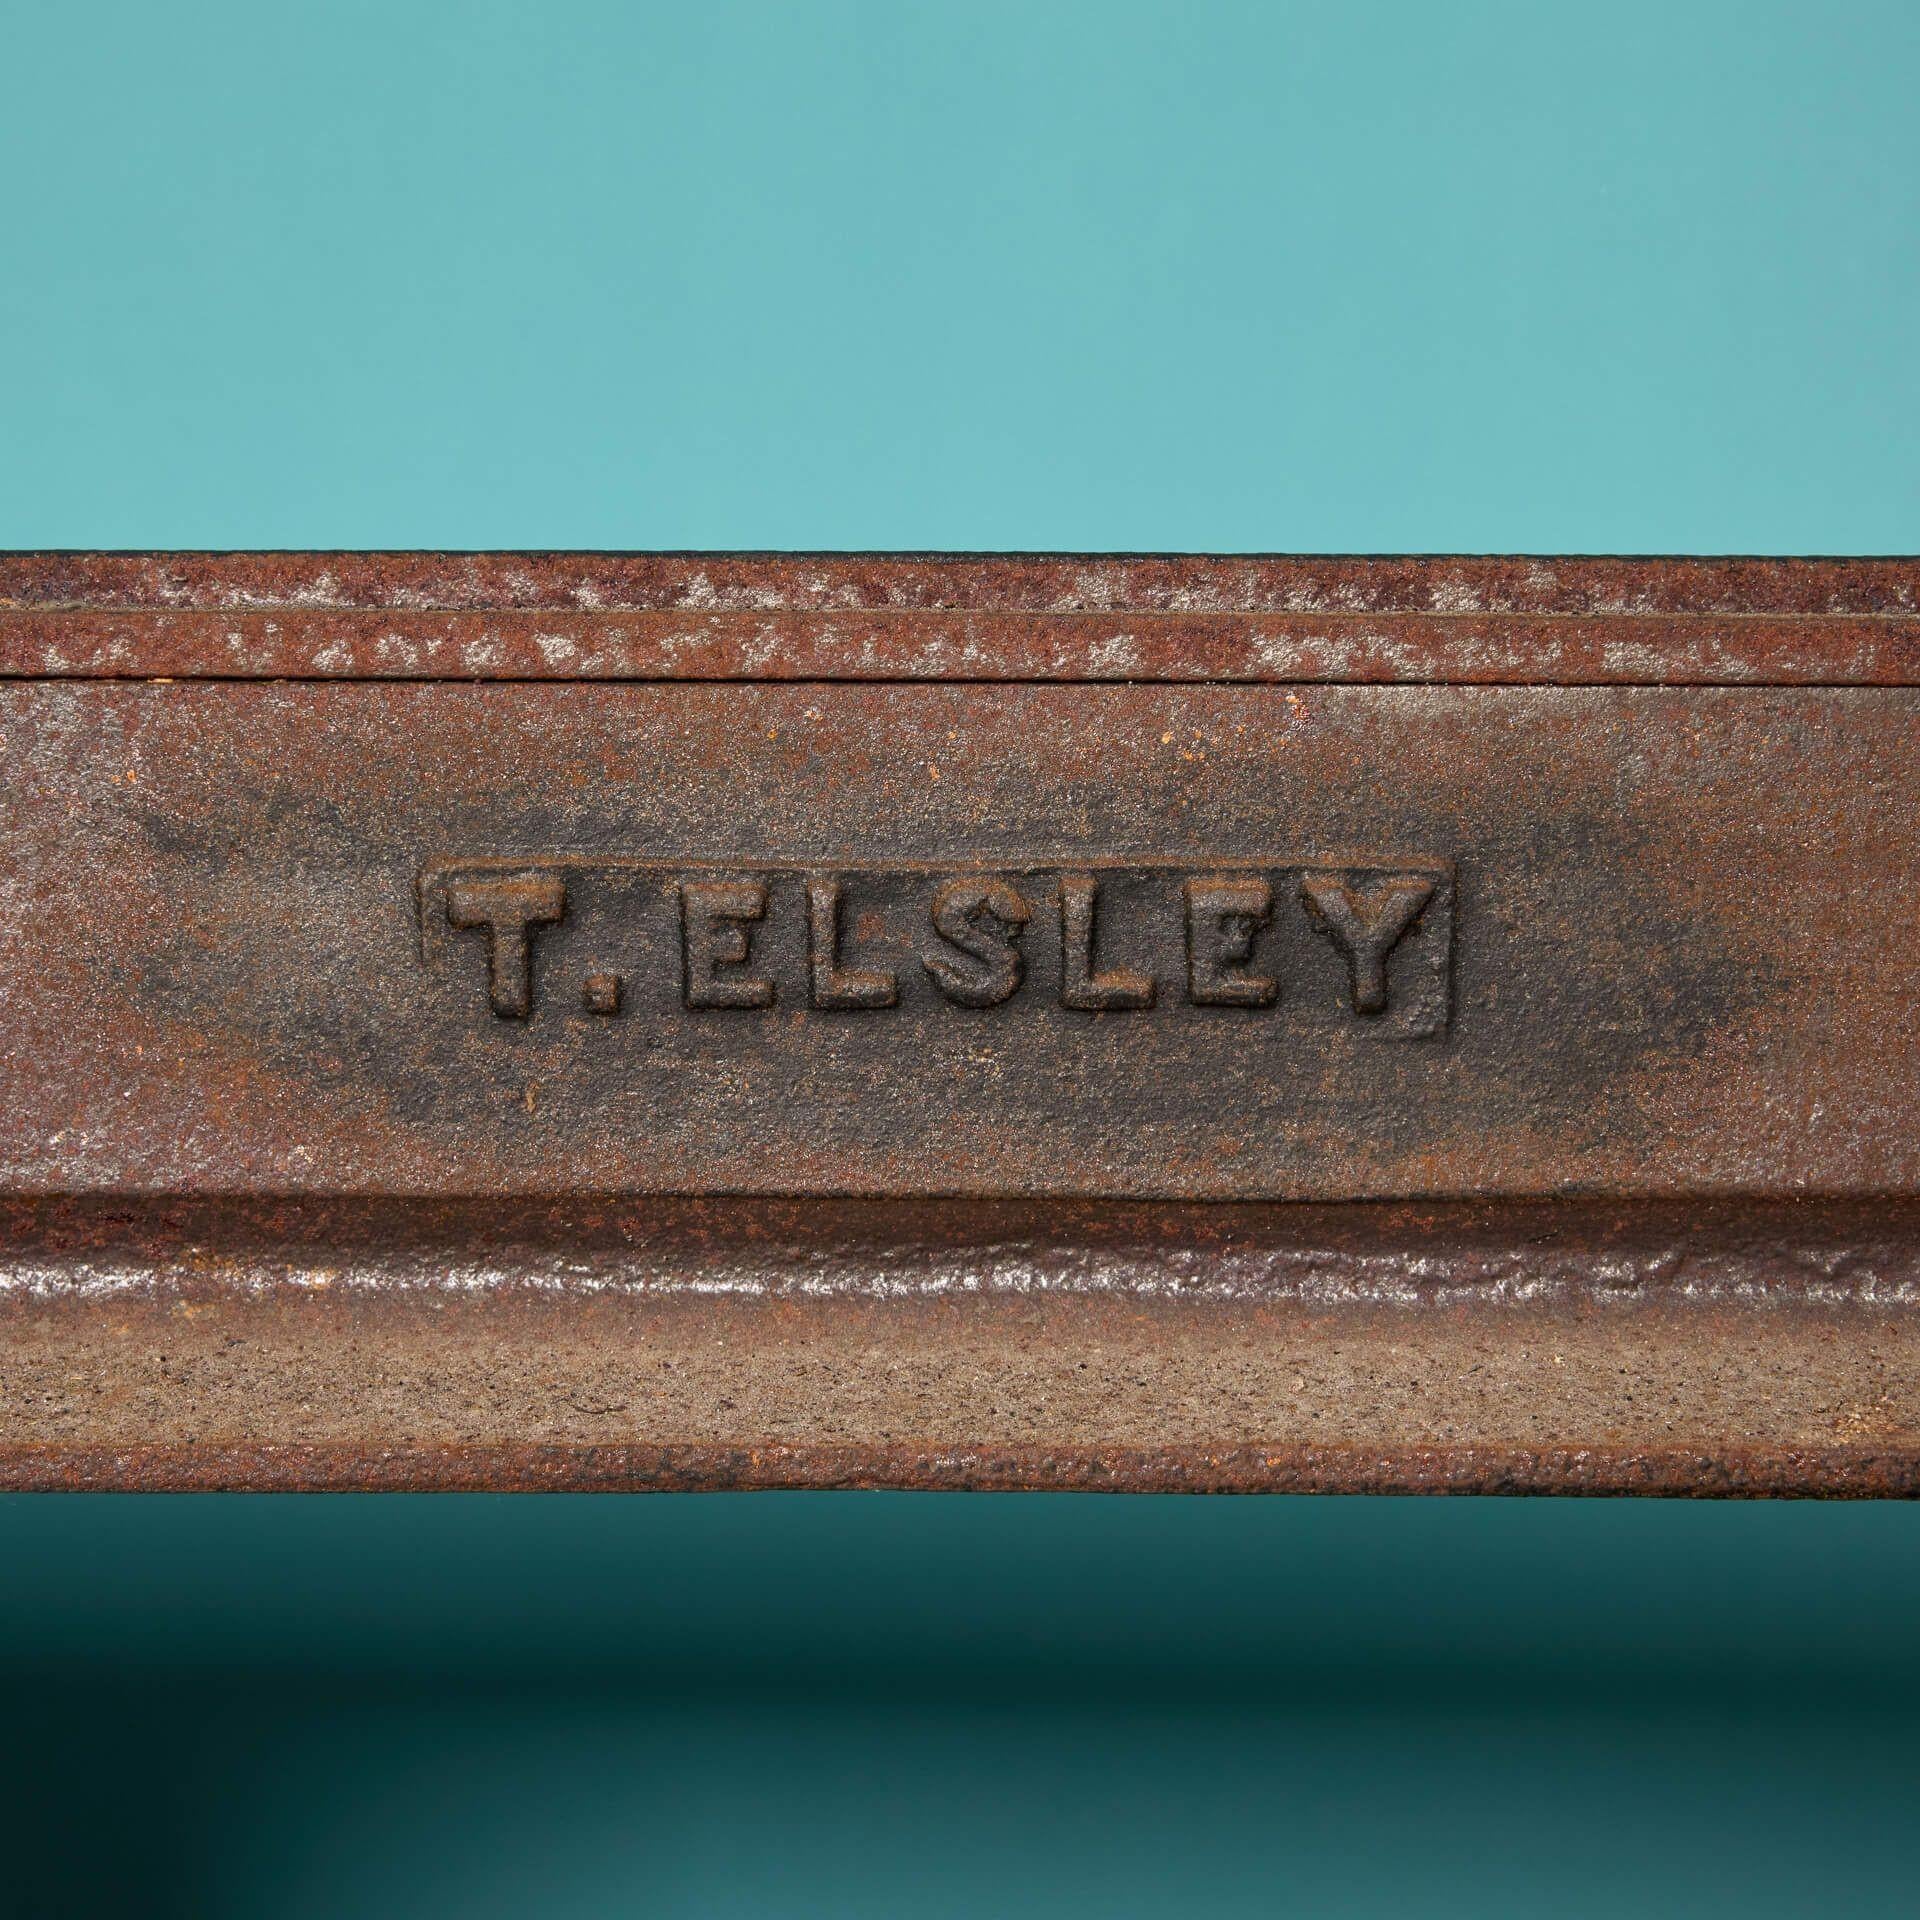 Antique Thomas Elsley Cast Iron Fire Insert In Fair Condition For Sale In Wormelow, Herefordshire